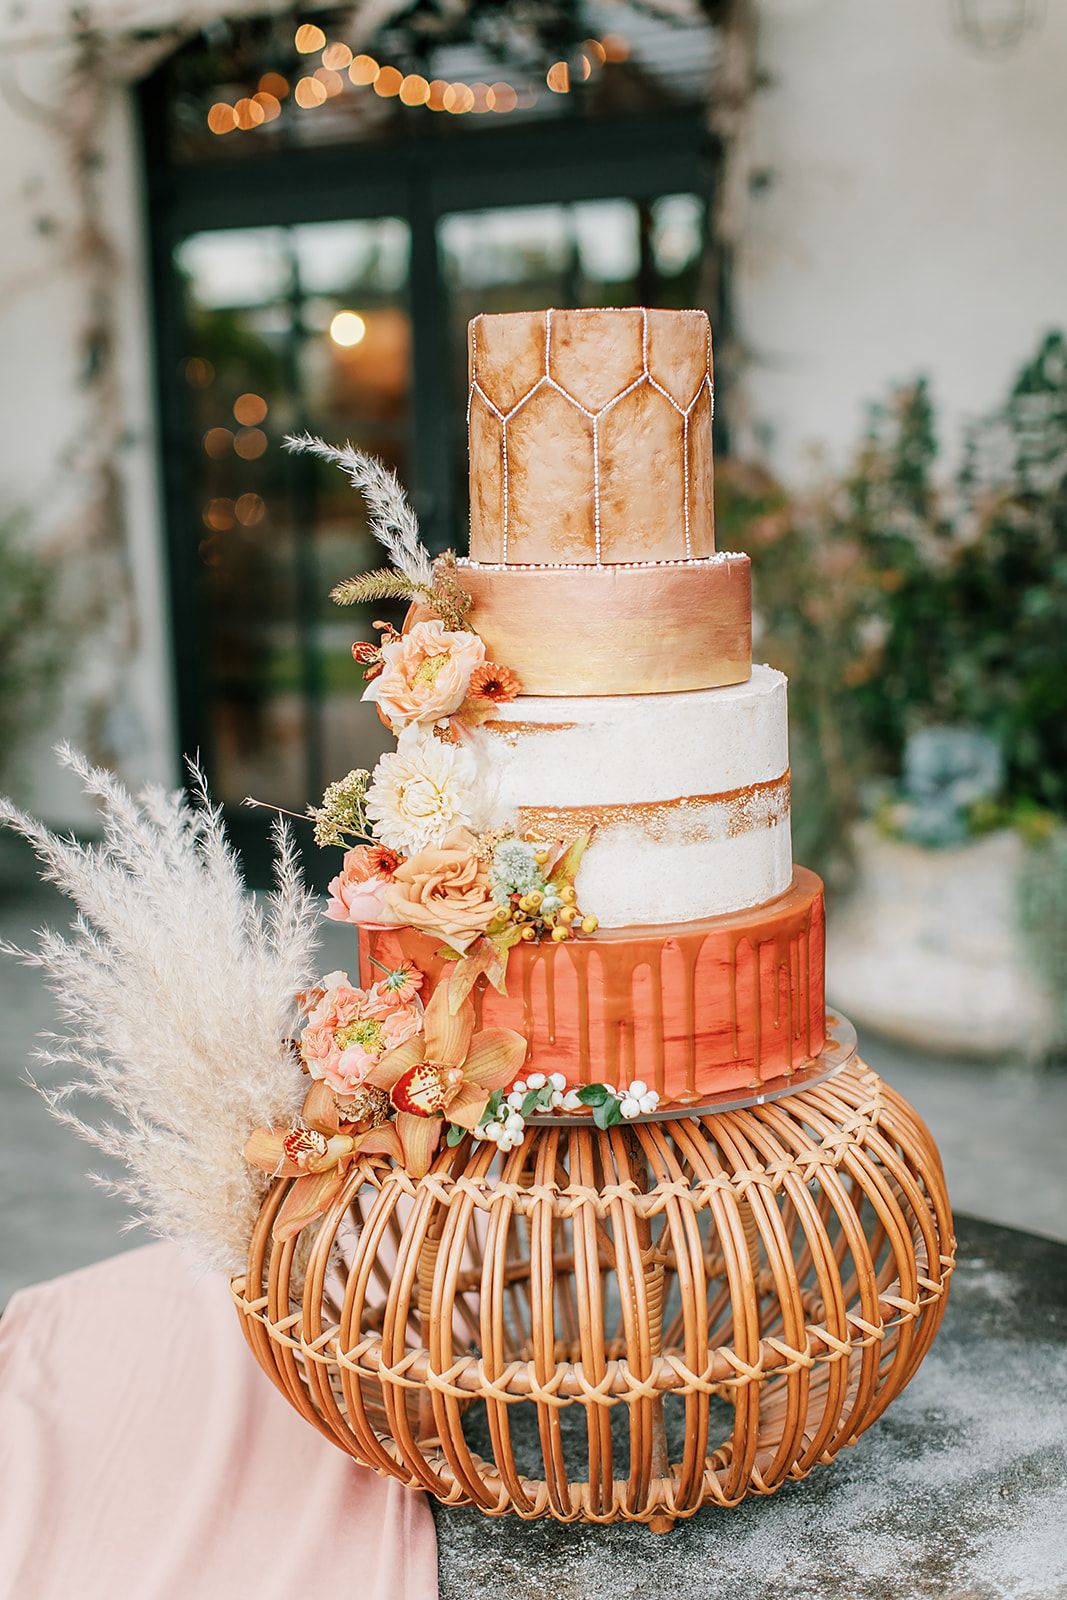 20 Unique Bohemian Wedding Cake Ideas for Your Big Day